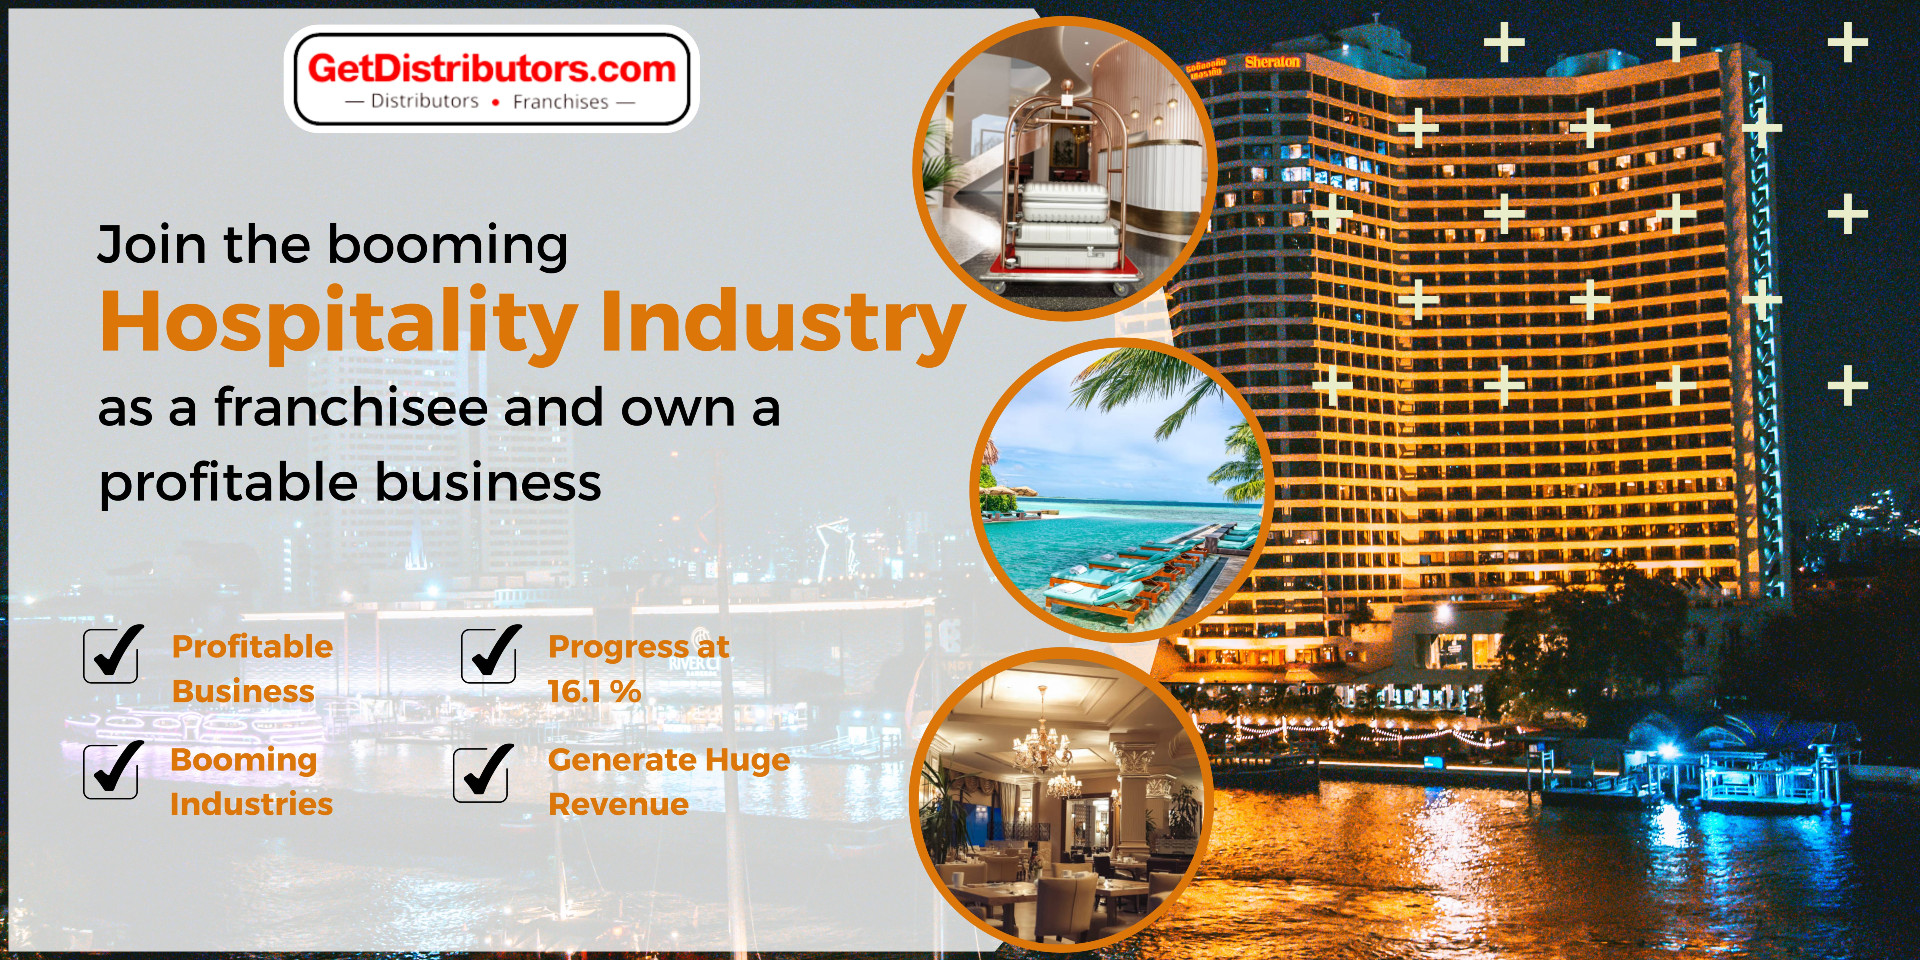 Join the booming Hospitality Industry as a franchisee and own a profitable business